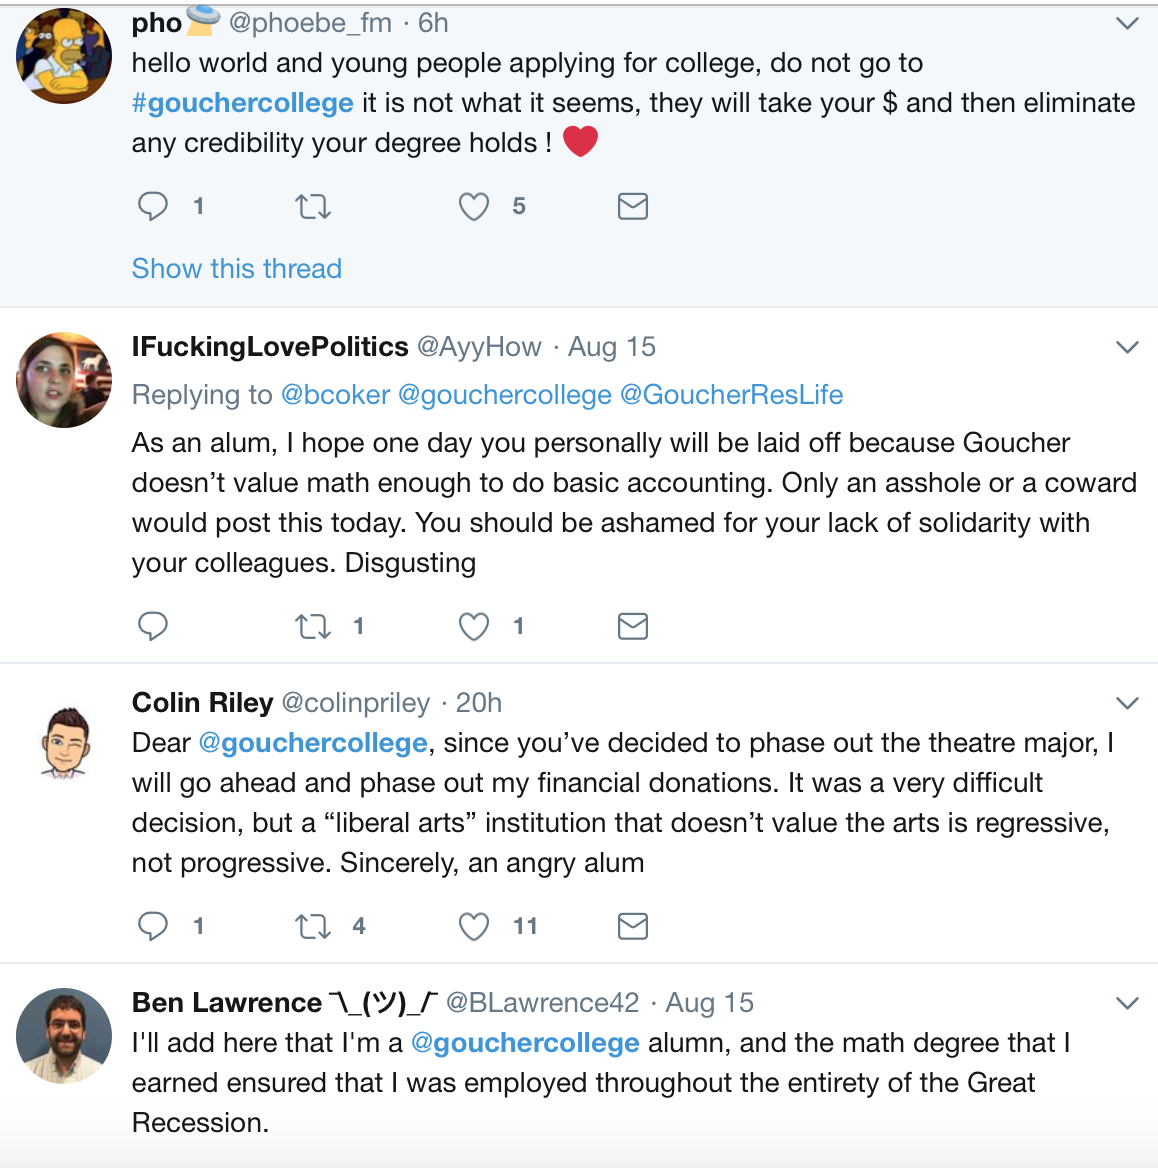 Text of tweet from @phoebe_fm: "hello world and young people applying for college, do not go to #gouchercollege it is not what it seems, they will take your money and then eliminate any credibility your degree holds." Tweet from @AyyHow: "As an alum, I hope one day you personally will be laid off because Goucher doesn't value math enough to do basic accounting. Only an asshole or a coward would post this today. You should be ashamed for your lack of solidarity with your colleagues. Disgusting." Tweet from @colinpriley: "Dear @gouchercollege, since you've decided to phase out the theatre major, I will go ahead and phase out my financial donations. It was a very difficult decision, but a 'liberal arts' institution that doesn't value the arts is regressive, not progressive. Sincerely, an angry alum." Tweet from @BLawrence 42: "I'll add here that I'm a @gouchercollege alumn, and the math degree that I earned ensured that I was employed throughout the entirety of the Great Recession."